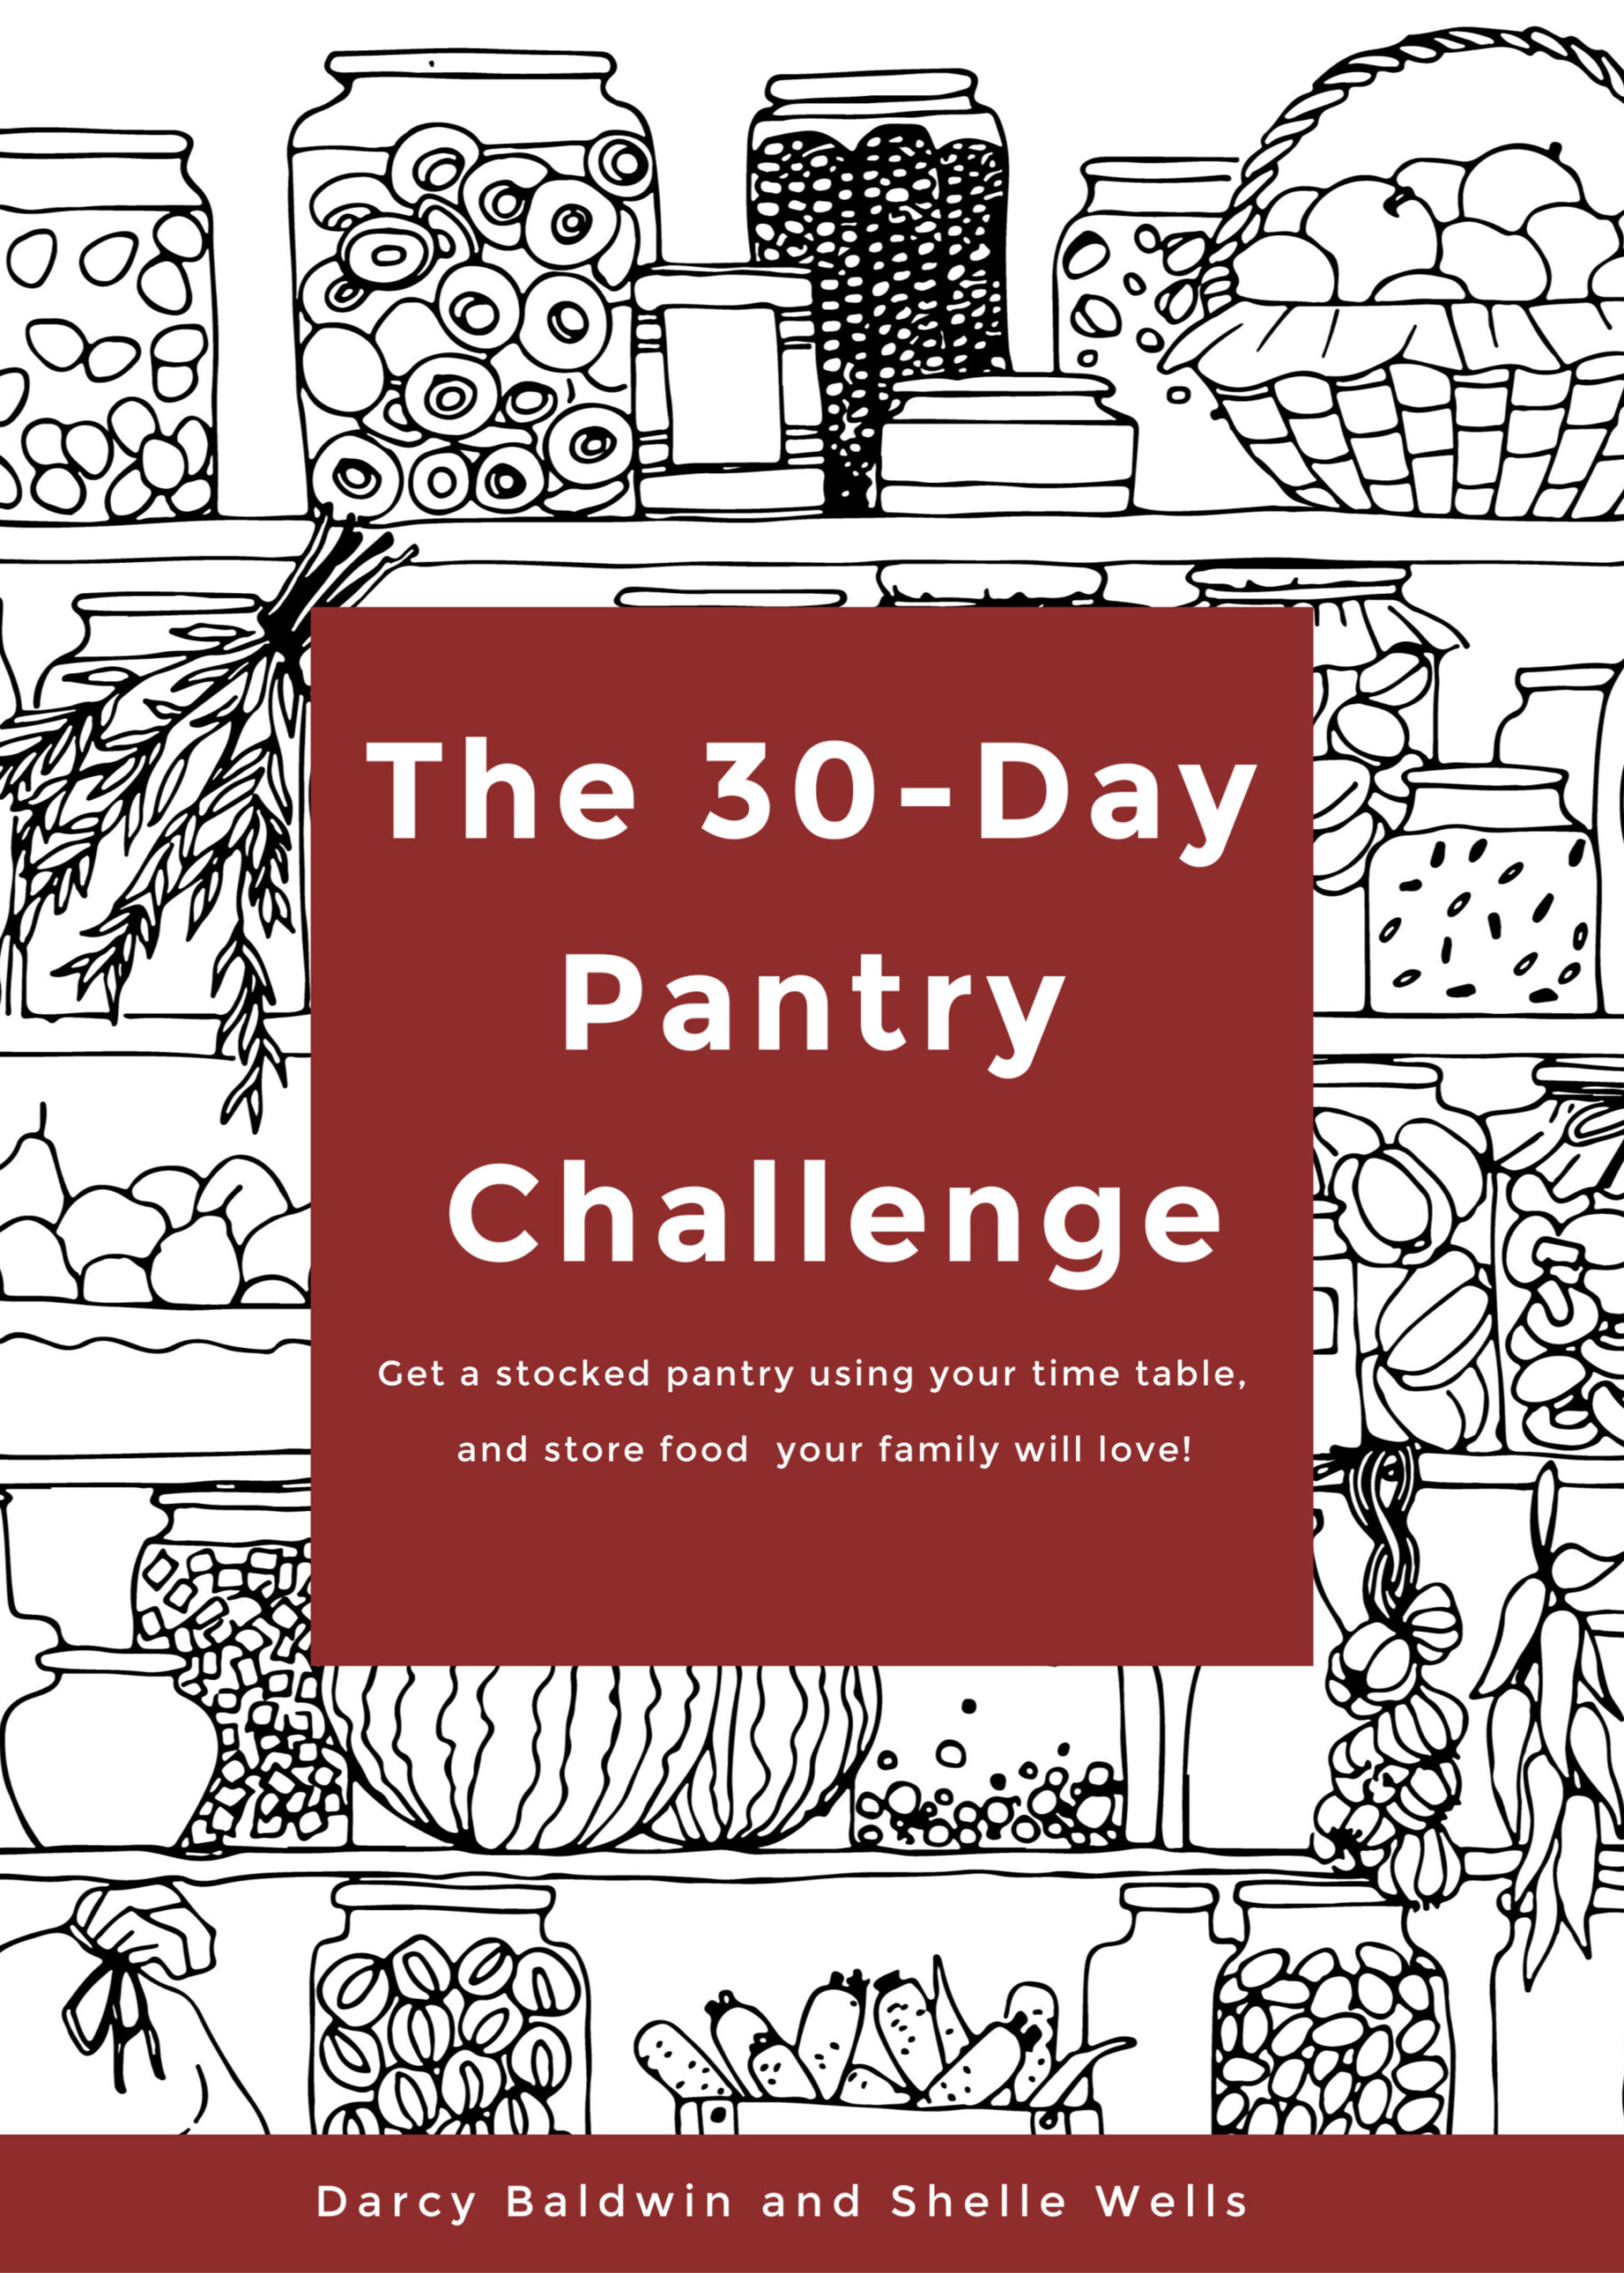 30 Day Pantry Challenge Starts Today!